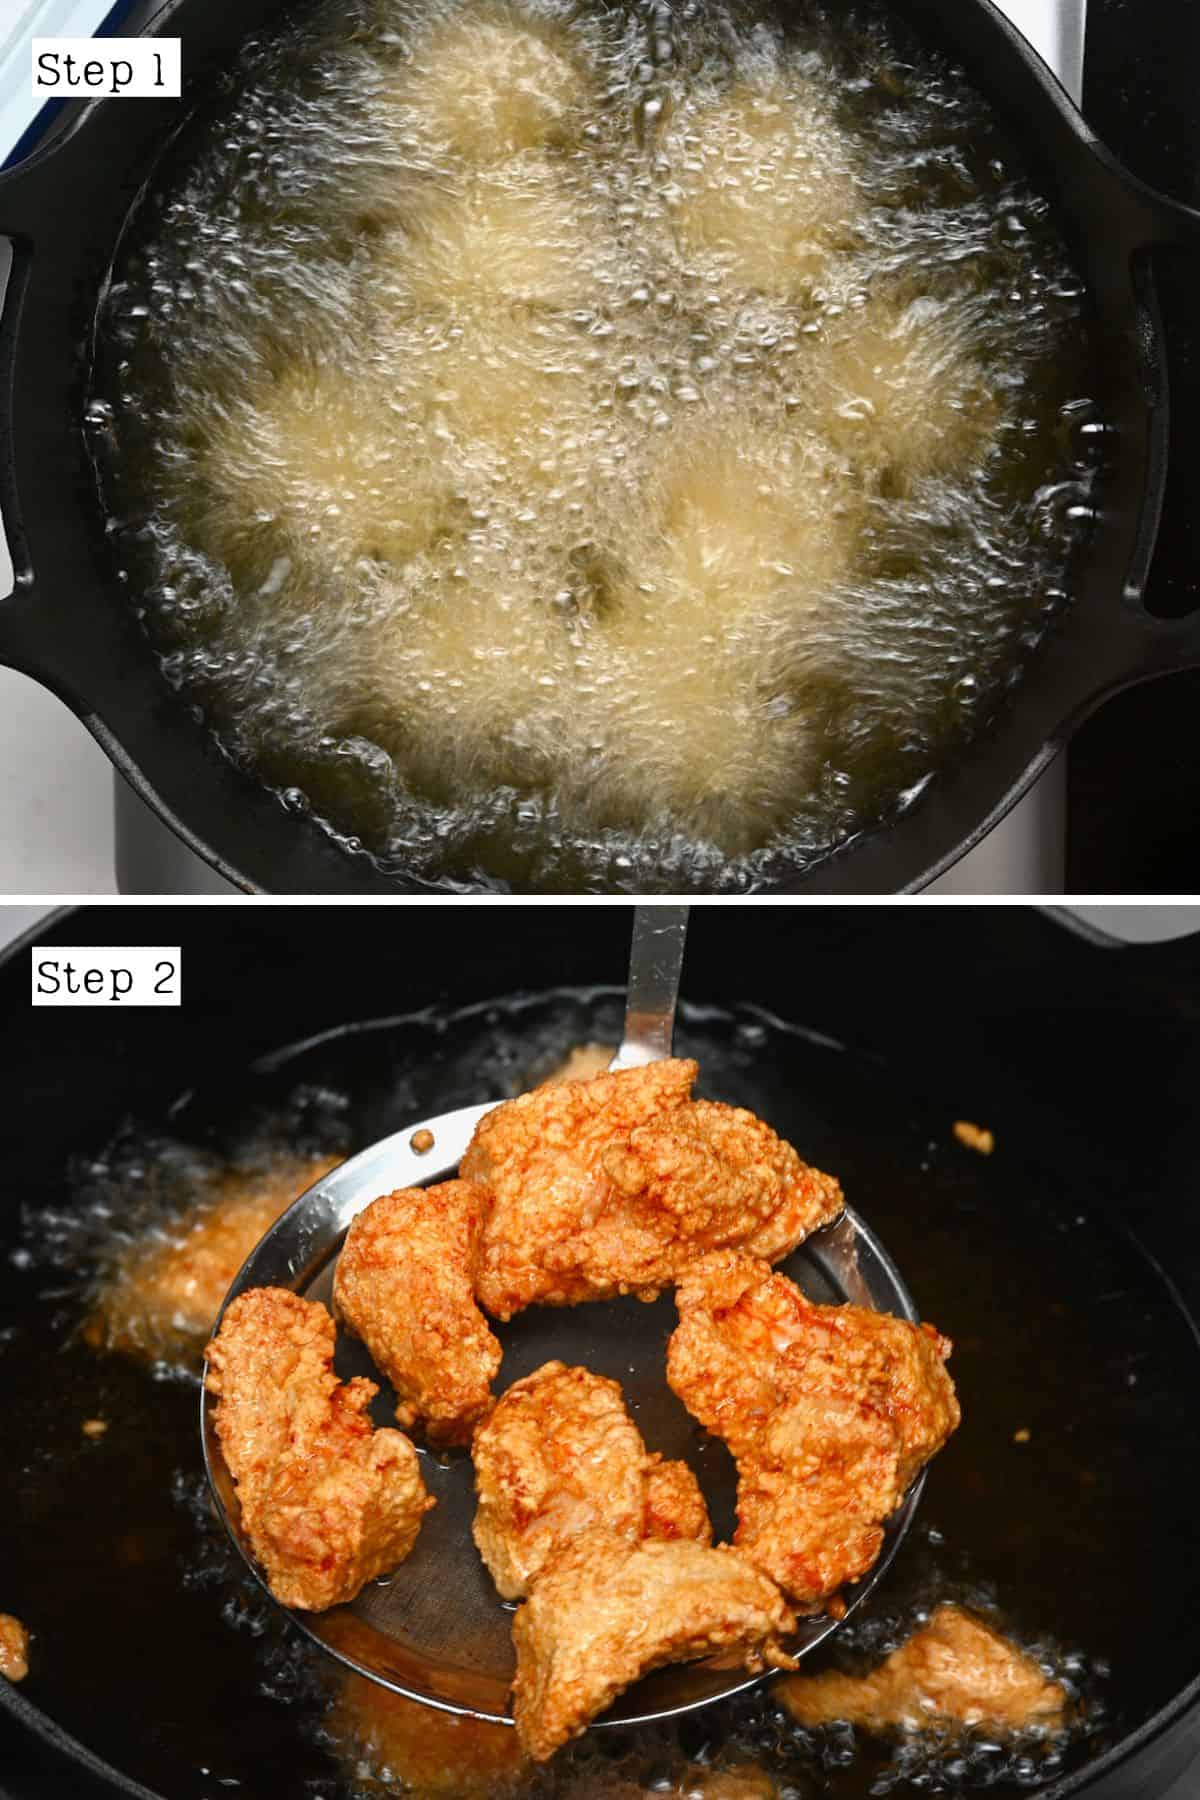 Steps for frying chicken pieces